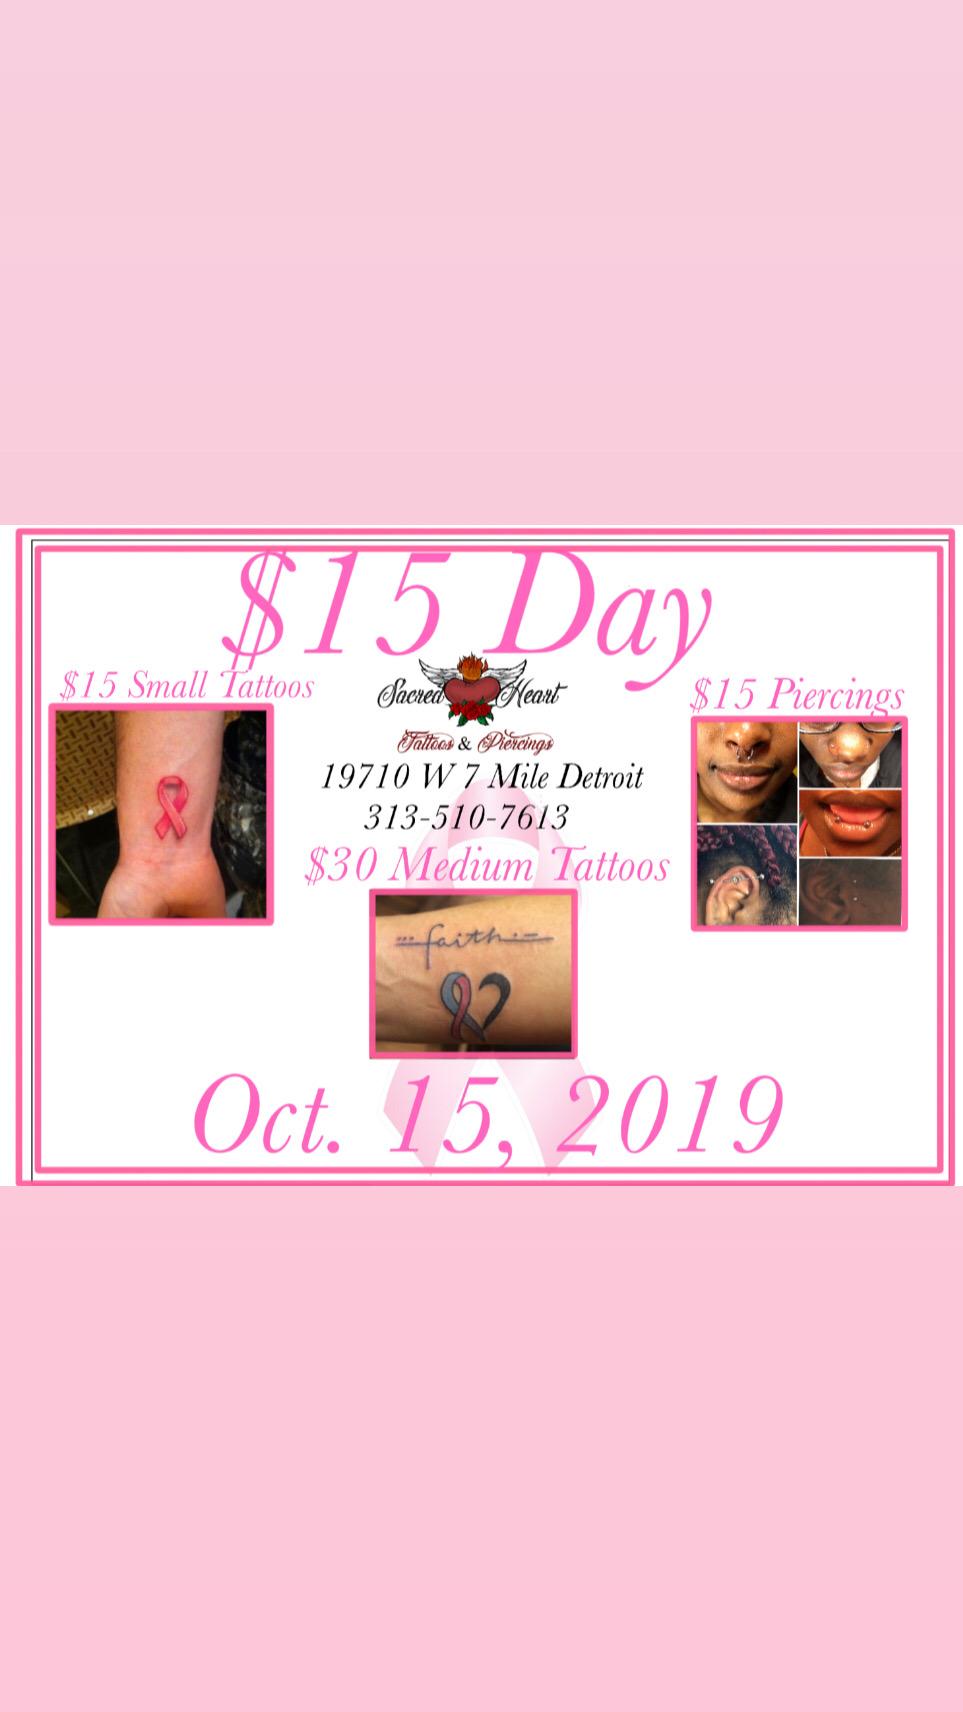 $15 Tattoos and Piercings